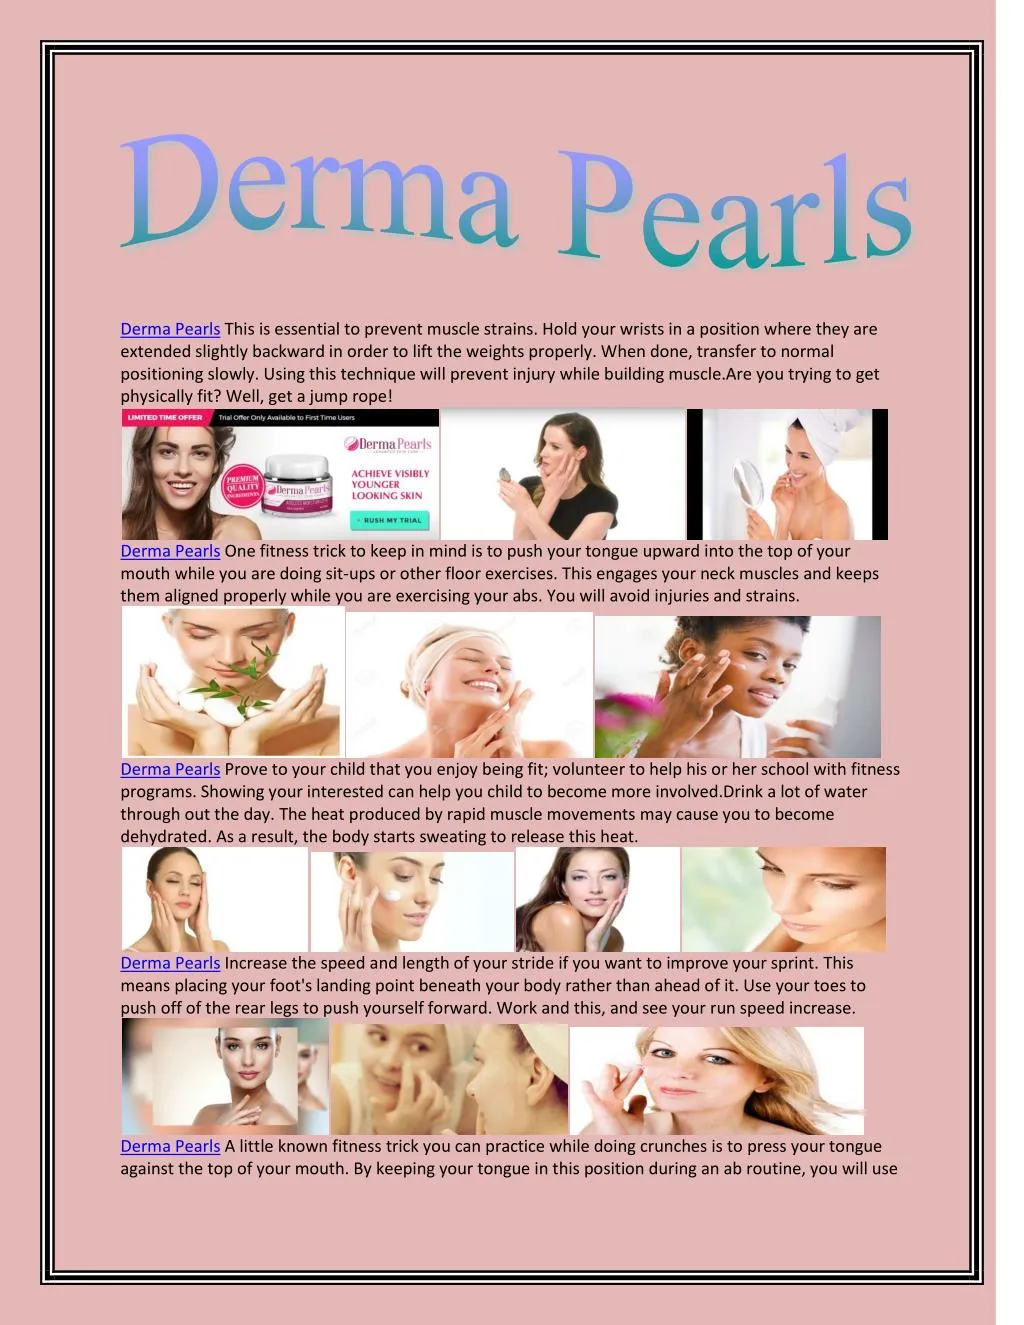 derma pearls this is essential to prevent muscle